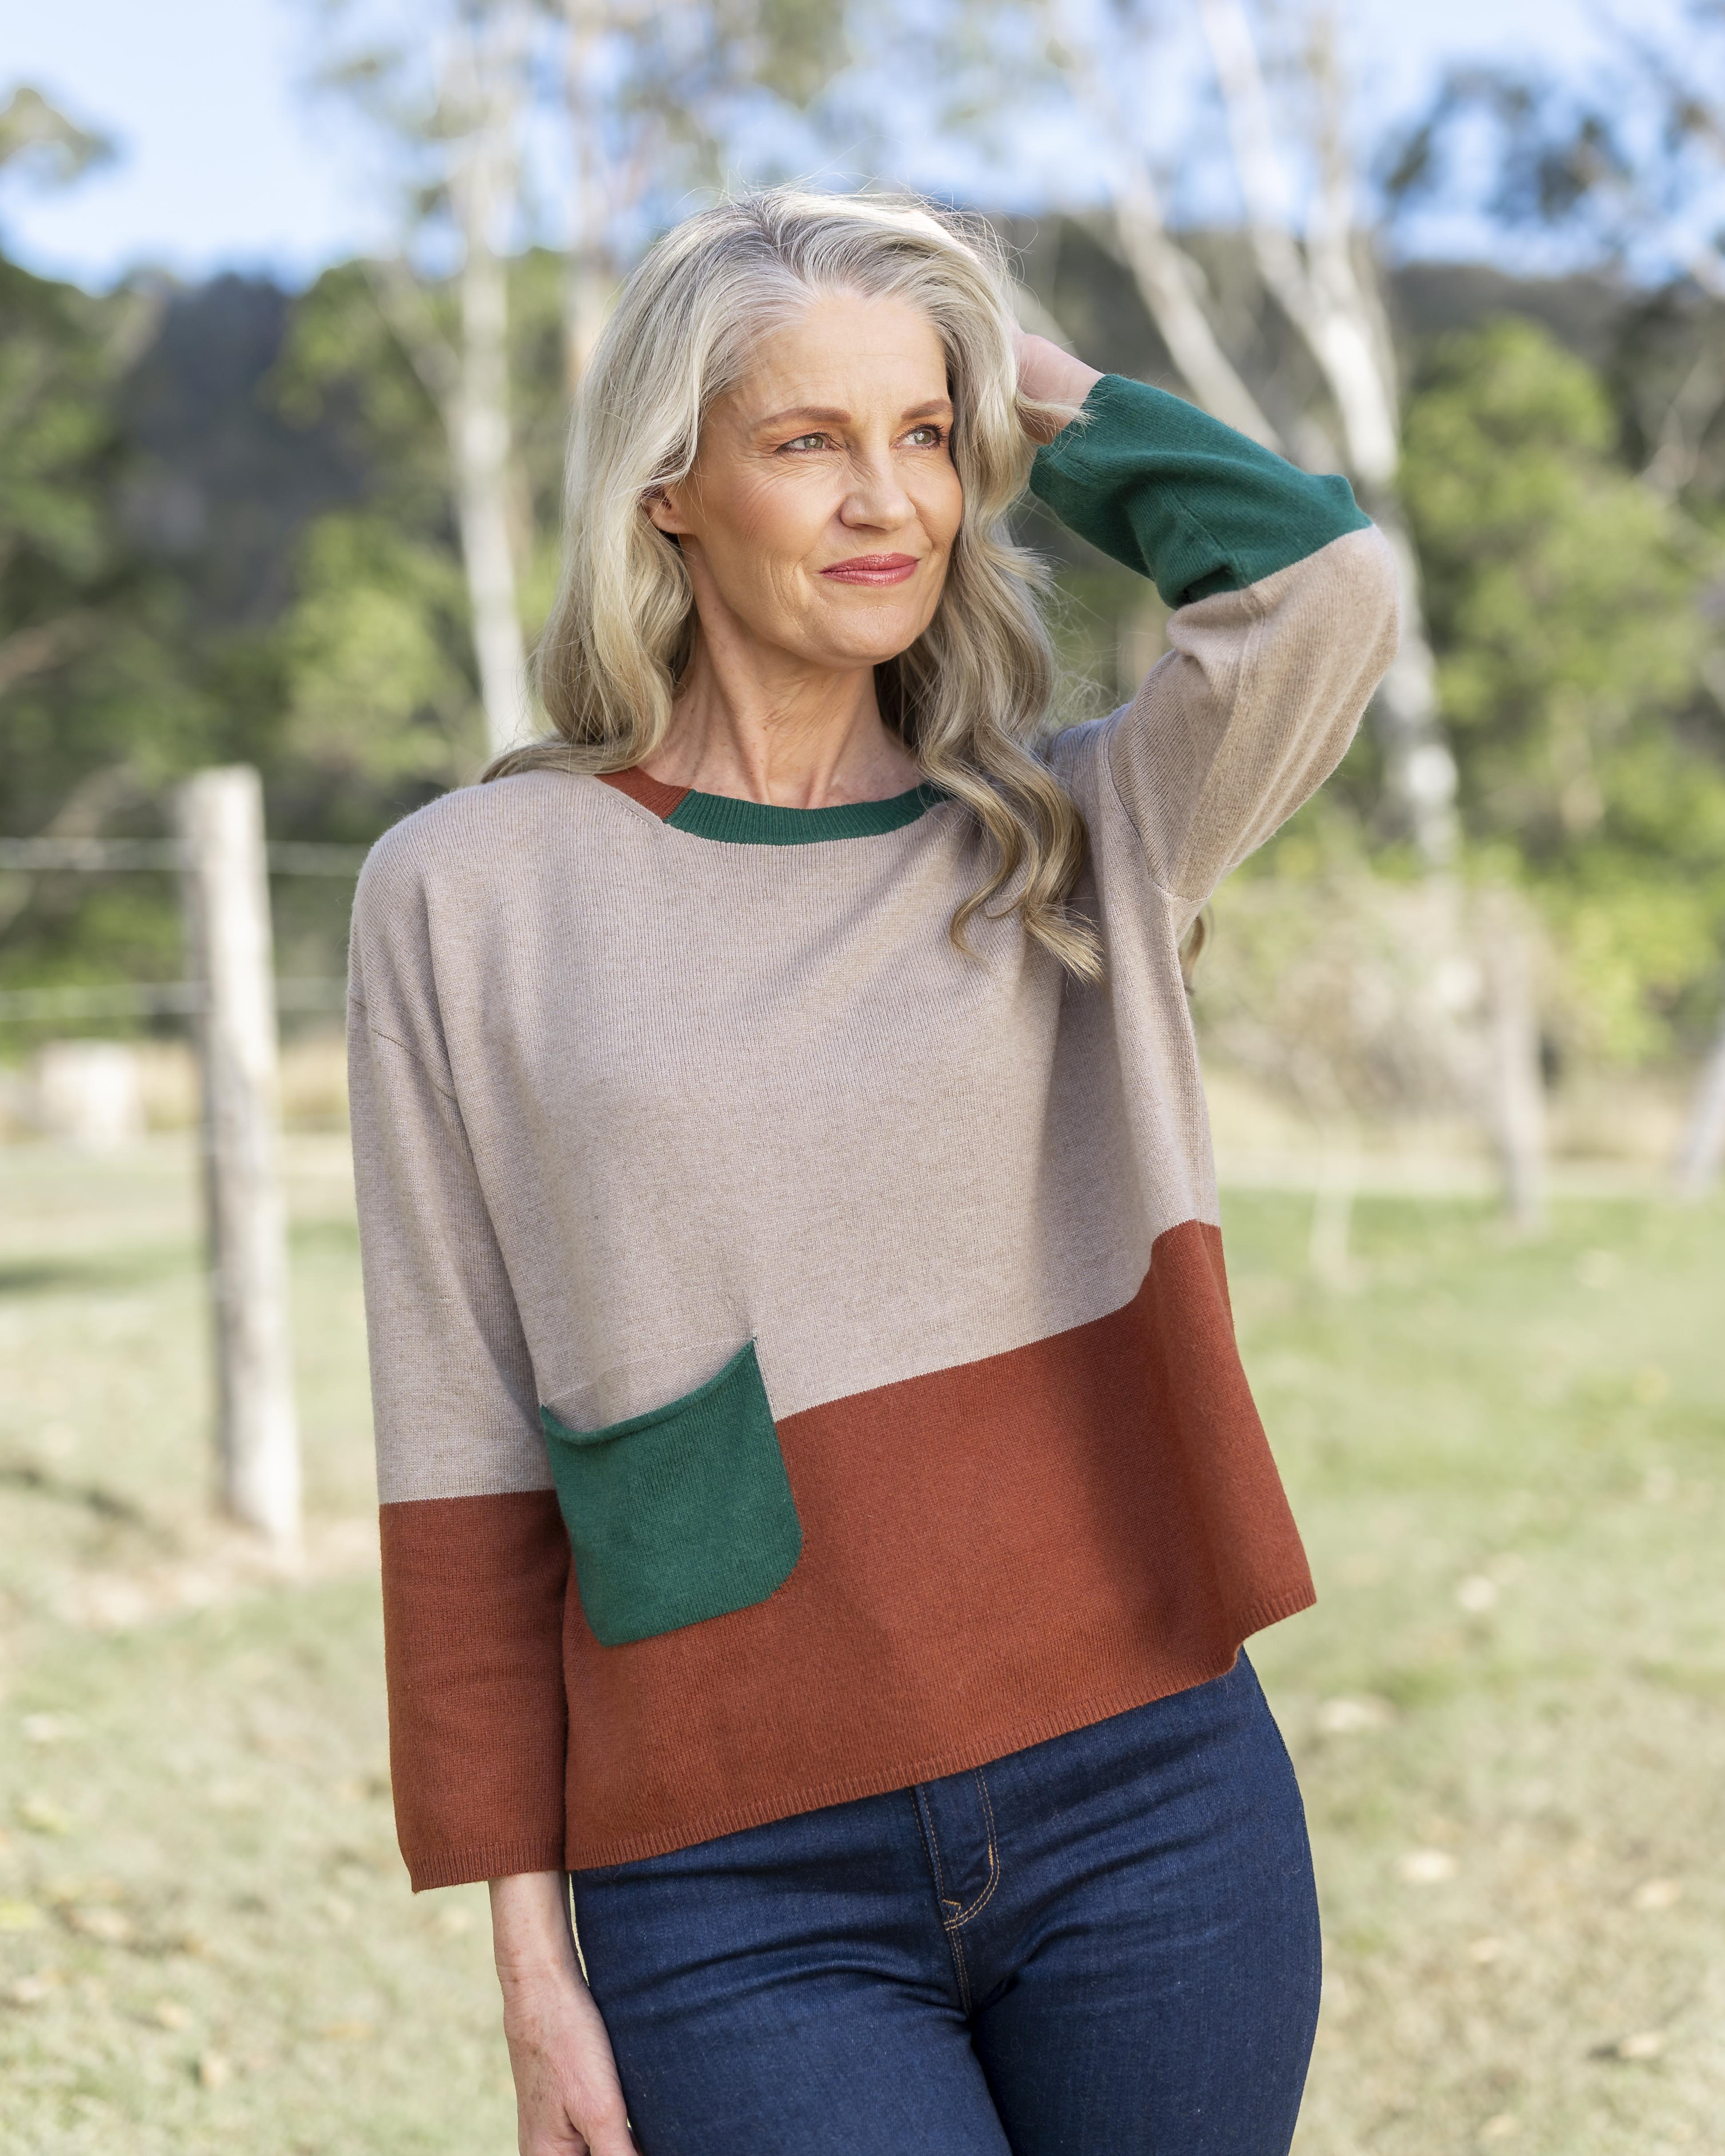 See Saw Colour Block Sweater - Stone/Nutmeg/Forest